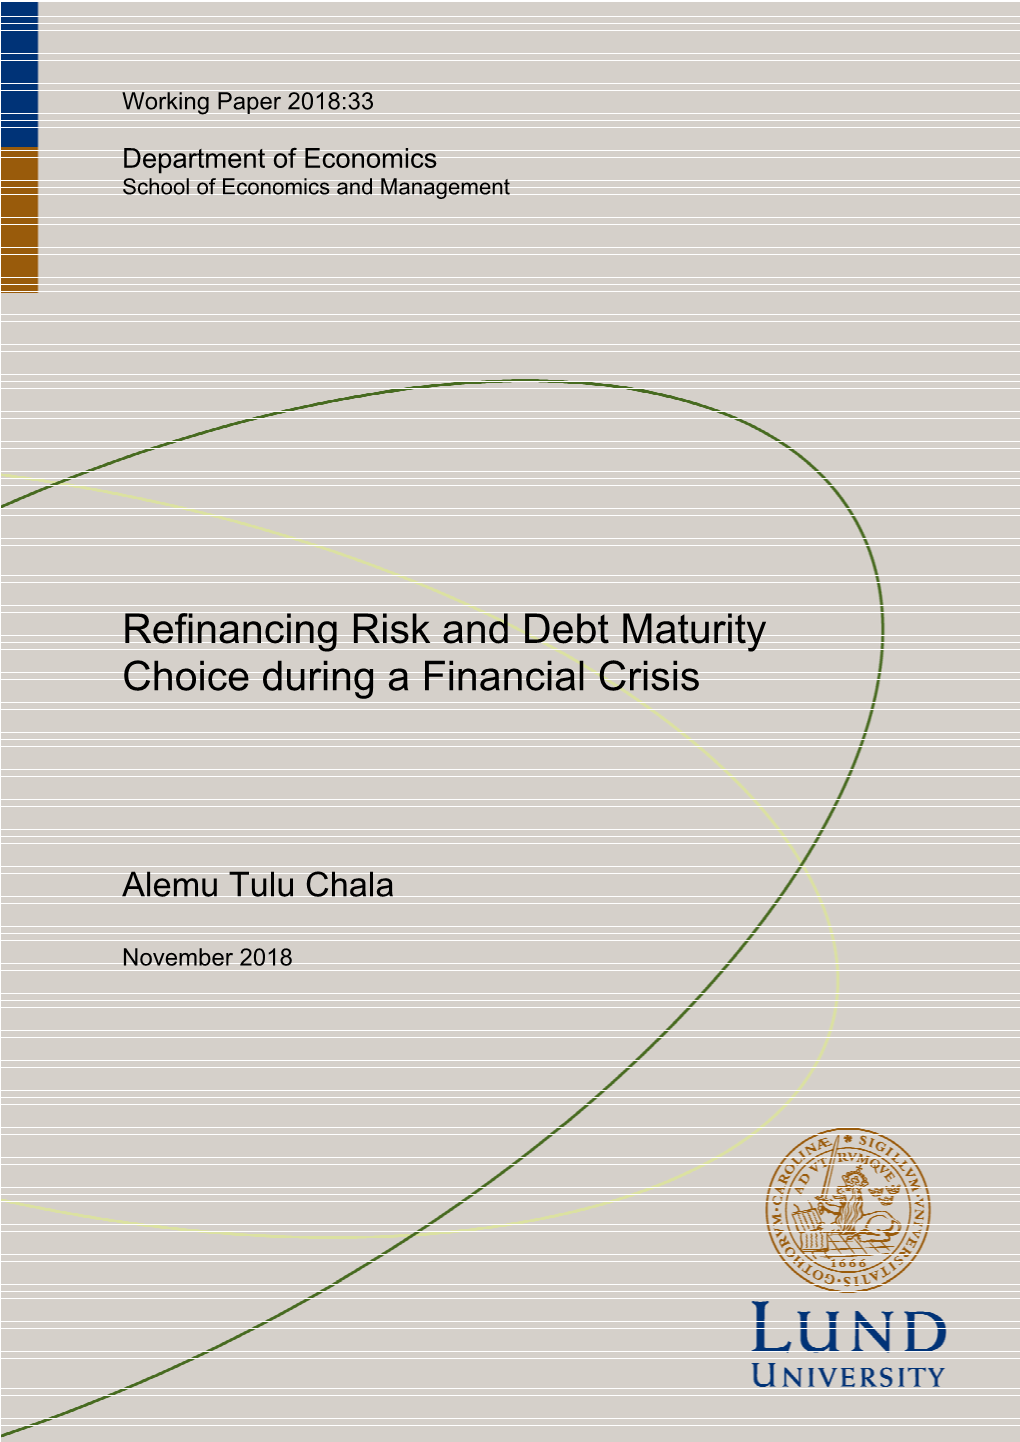 Refinancing Risk and Debt Maturity Choice During a Financial Crisis